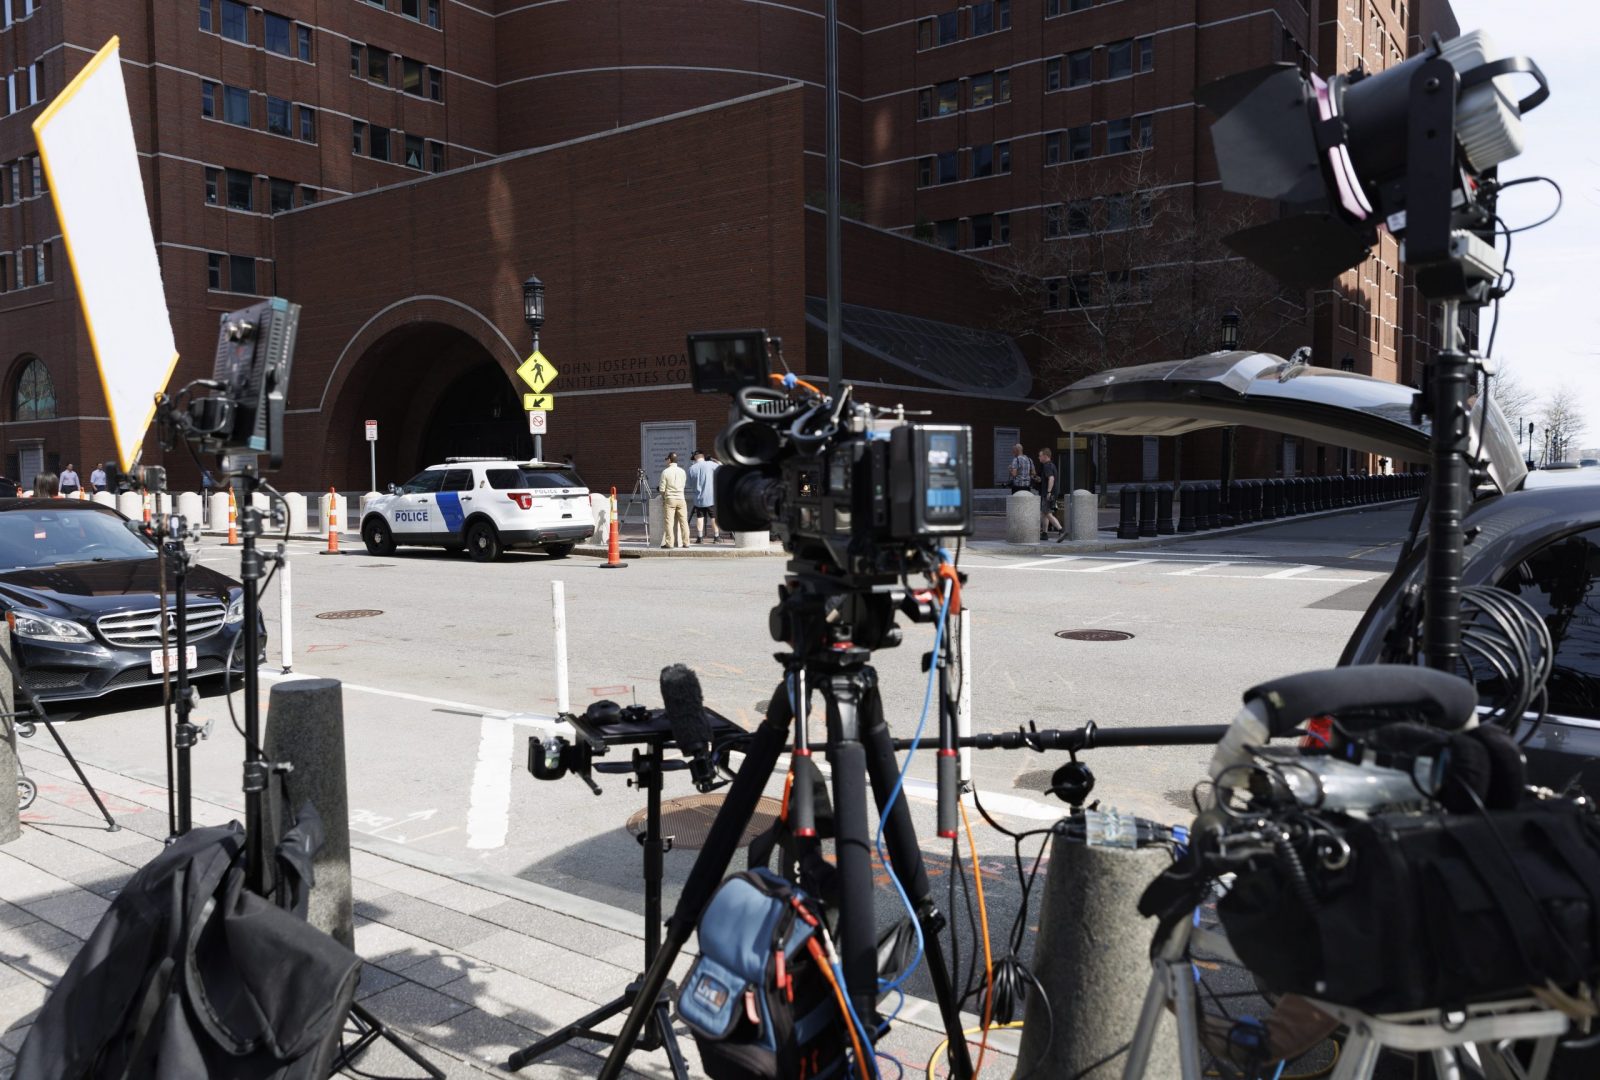 epa10572578 Television news crews set up outside the John Joseph Moakley Federal Courthouse, where the hearing for Jack Douglas Teixeira, who served as an Air National Guardsman and is now a suspect in a US intelligence leak, is to be held in Boston, Massachusetts, USA, 14 April 2023. Teixeira was taken into custody at his home in North Dighton, Massachustts, on 13 April 2023, by US authorities, as confirmed by the US Attorney General in a statement, as part of a Justice Department inquiry into the intelligence documents which were leaked online starting in March 2023.  EPA/CJ GUNTHER